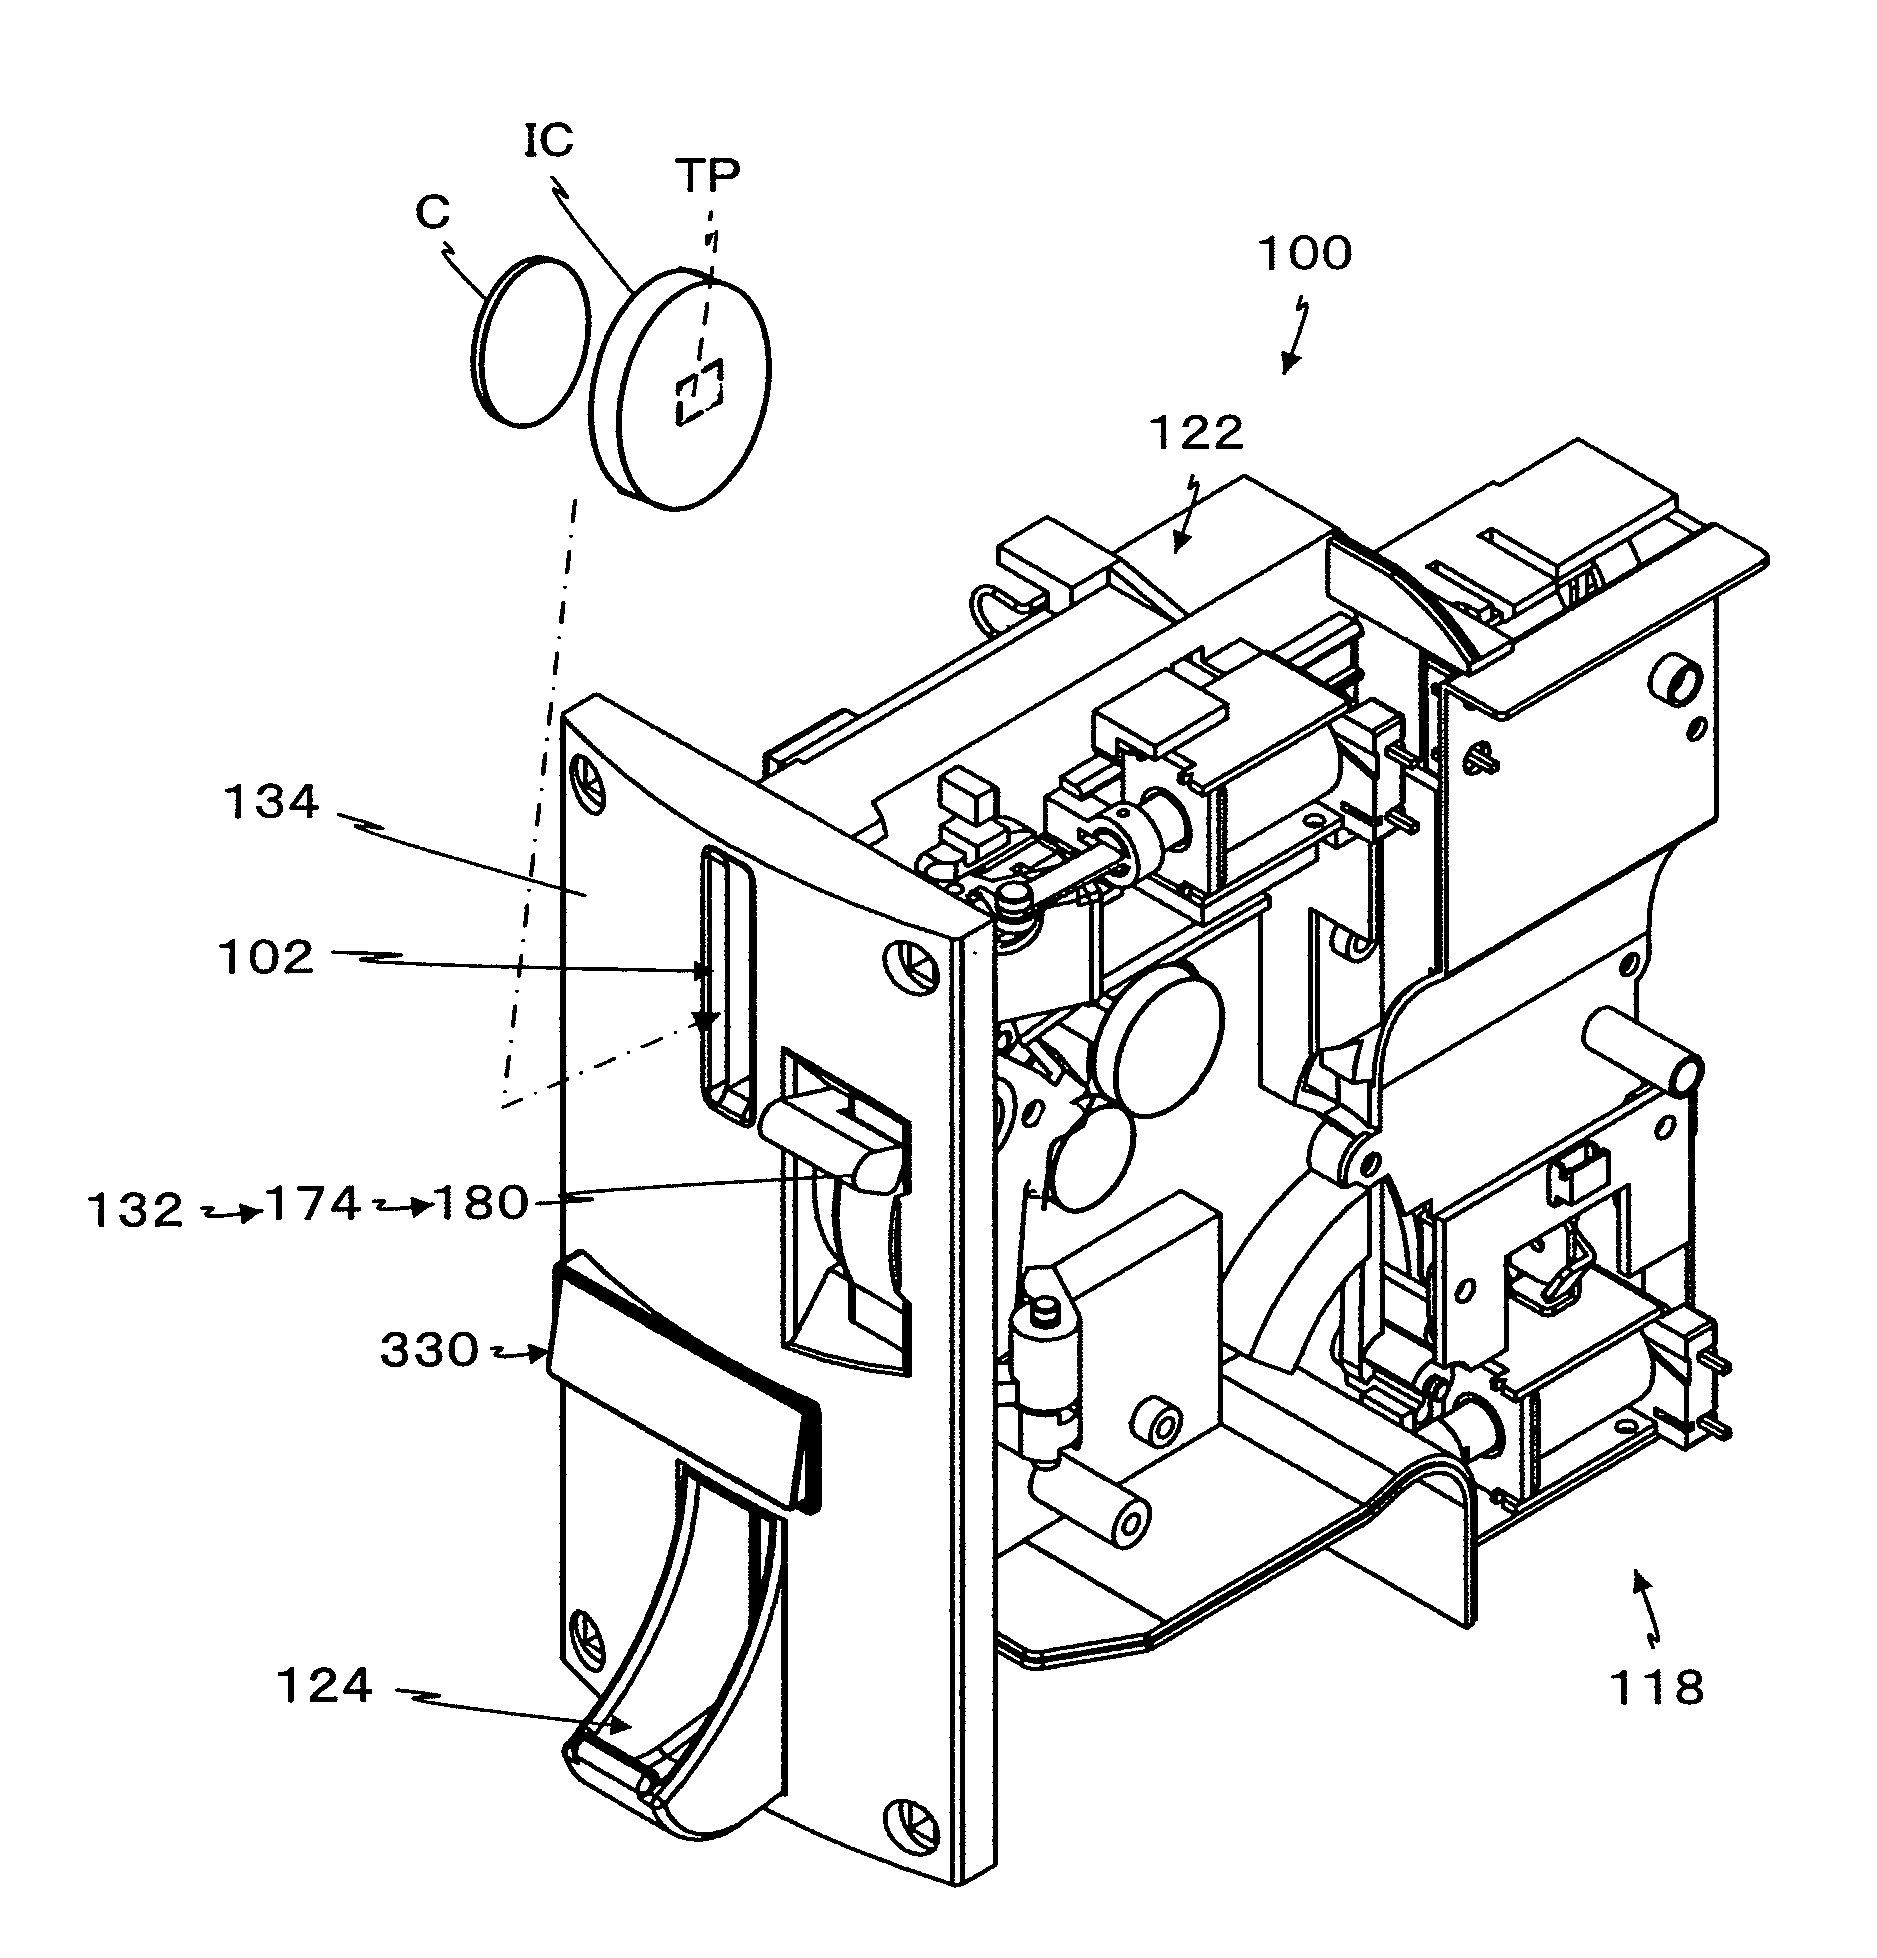 Value medium processing device for IC coins and monetary coins